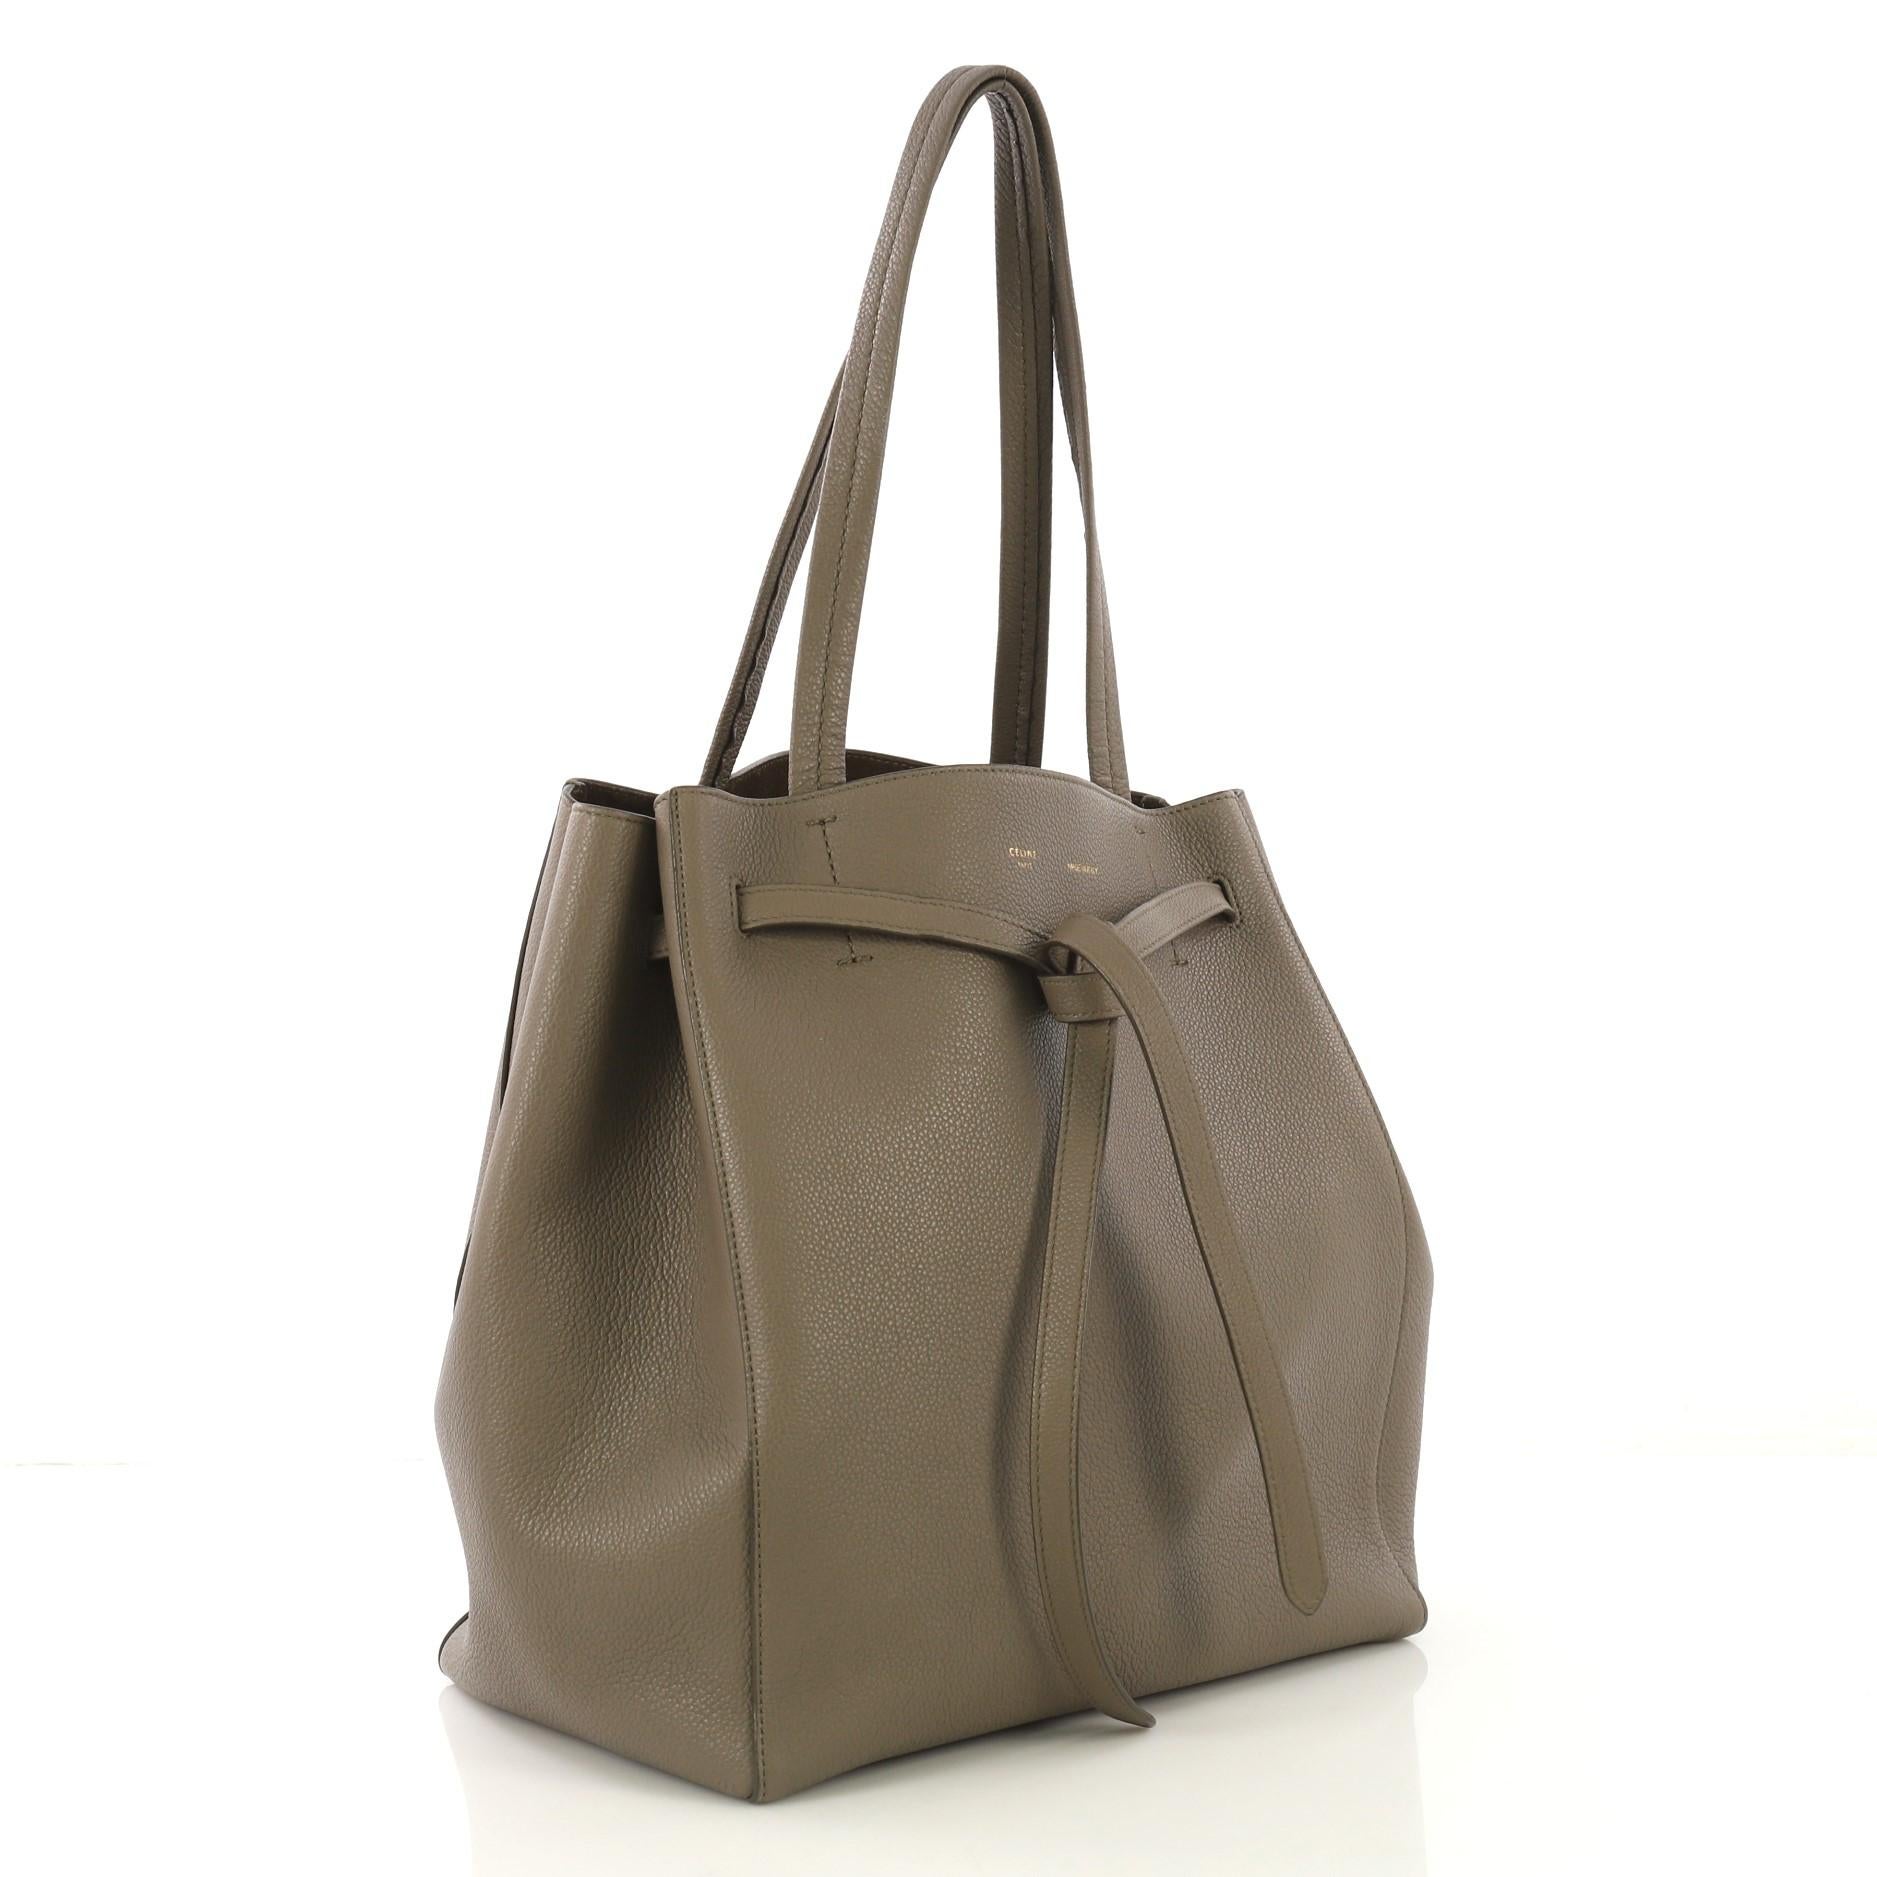 This Celine Phantom Tie Cabas Tote Leather Small, crafted from taupe leather, features dual flat tall handles, stamped Celine logo, and gold-tone hardware. Its drawstring tie closure opens to a brown suede interior with side zip pocket. 

Estimated